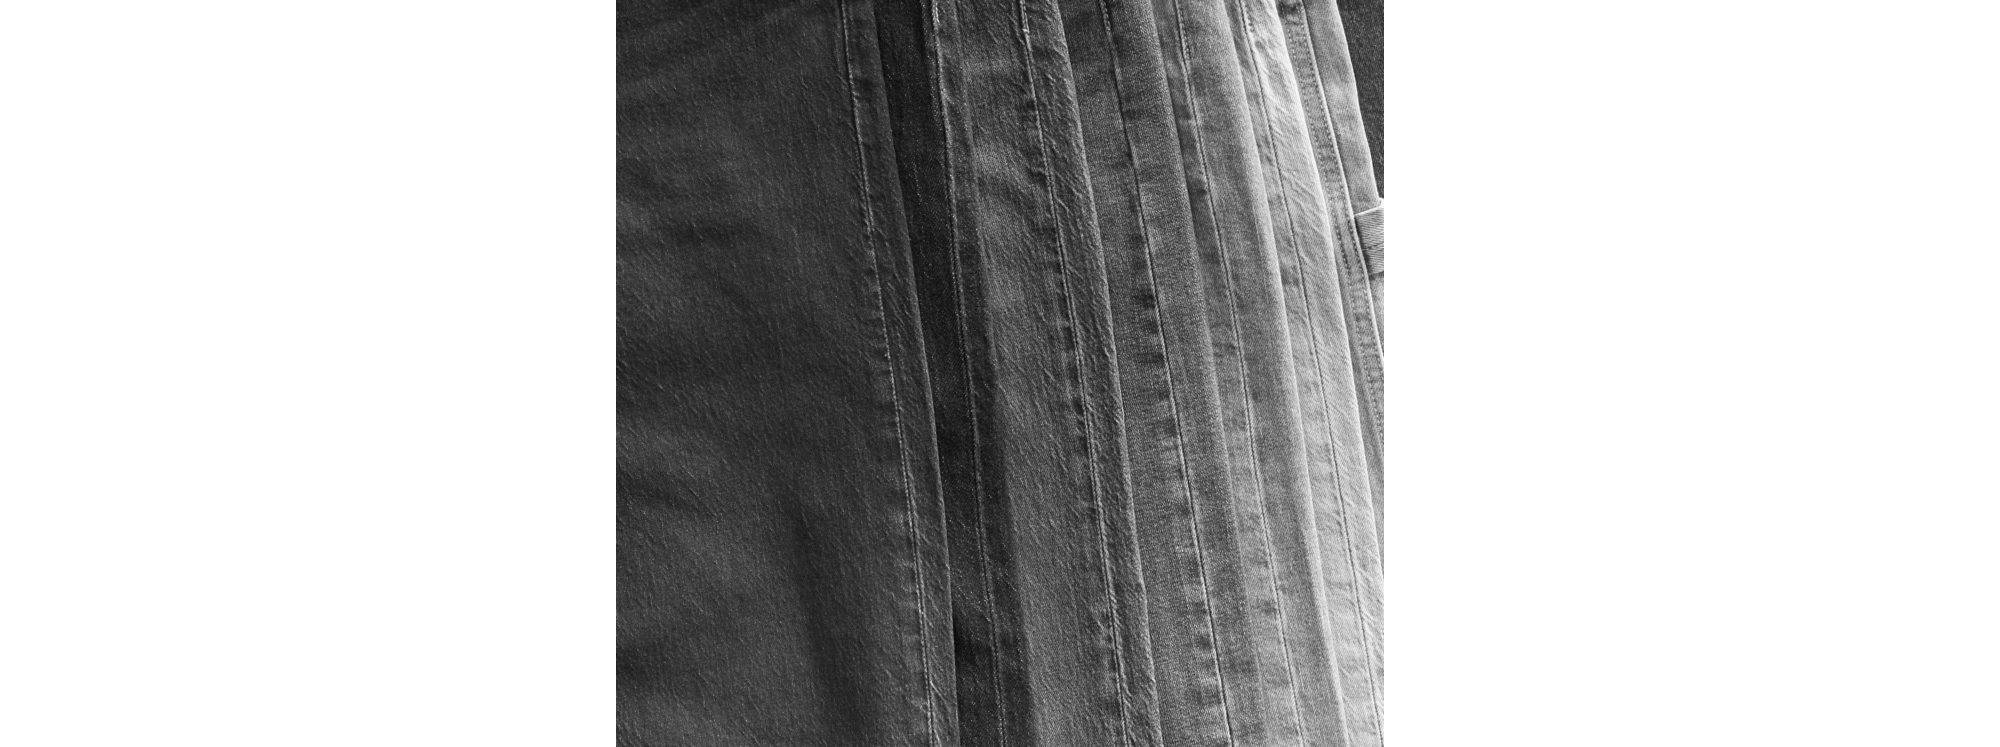 Black and white image of a stack of denim jeans.